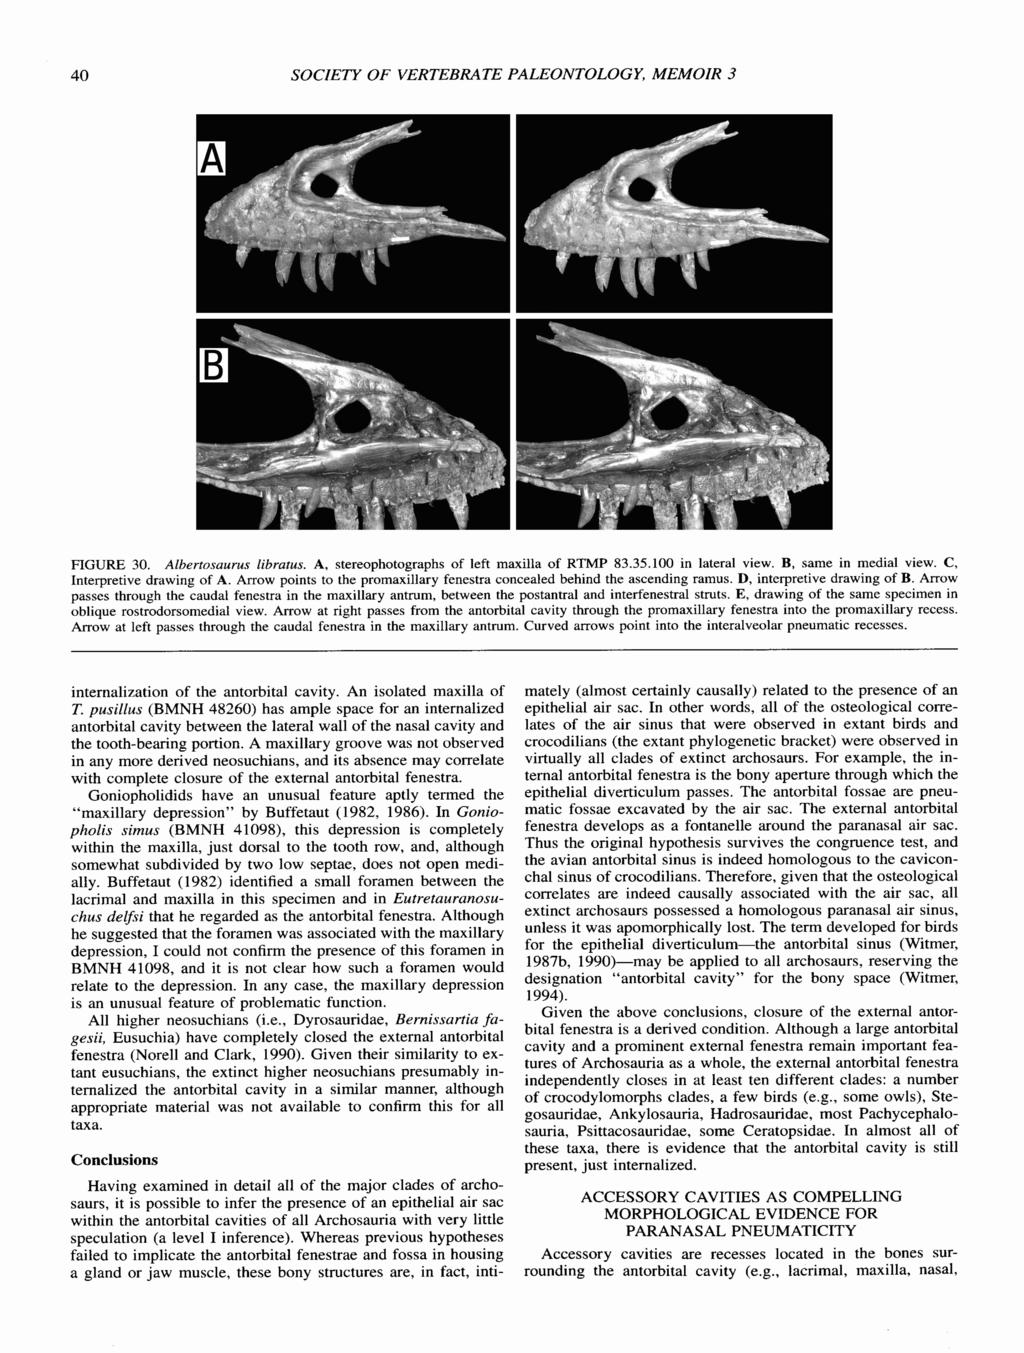 SOCIETY OF VERTEBRATE PALEONTOLOGY, MEMOIR 3 FIGURE 30. Albertosaurus libratus. A, stereophotographs of left maxilla of RTMP 83.35.100 in lateral view. B, same in medial view.